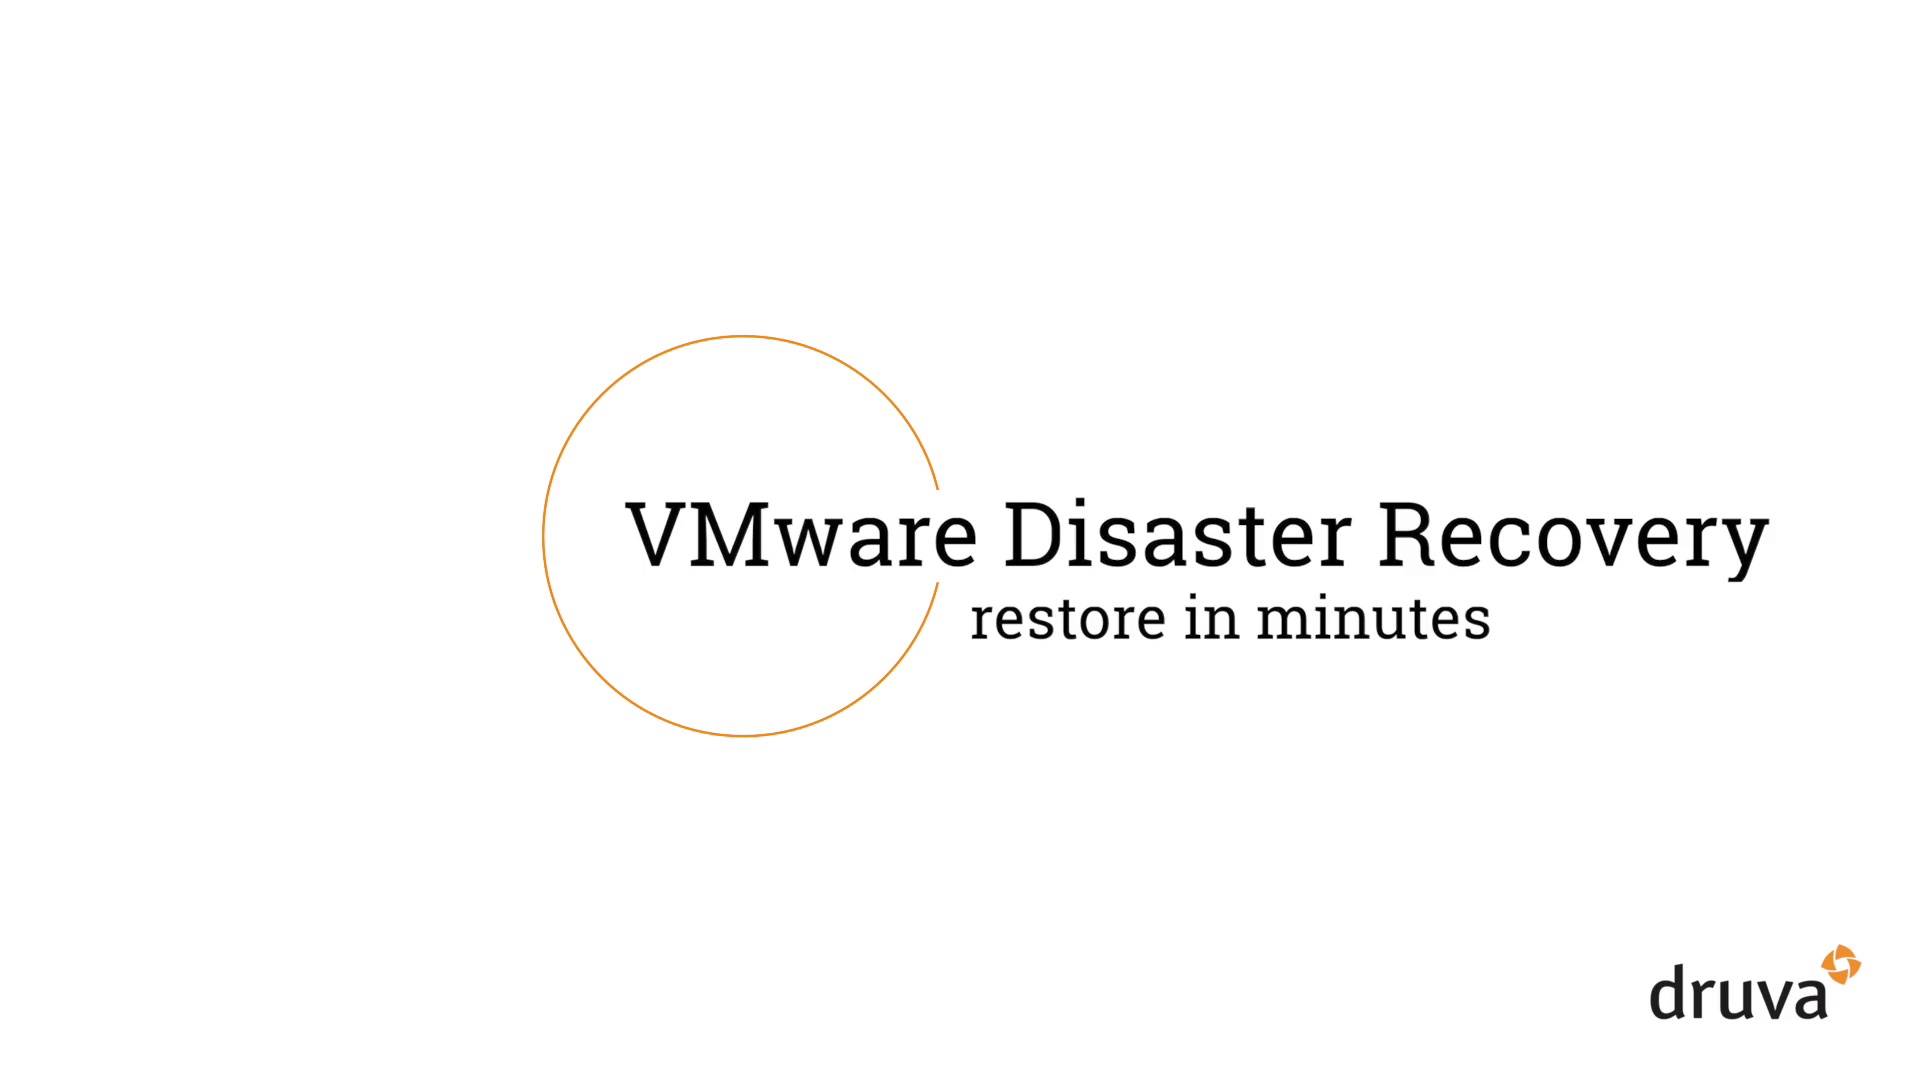 Disaster Recovery for VMware: Restore in minutes